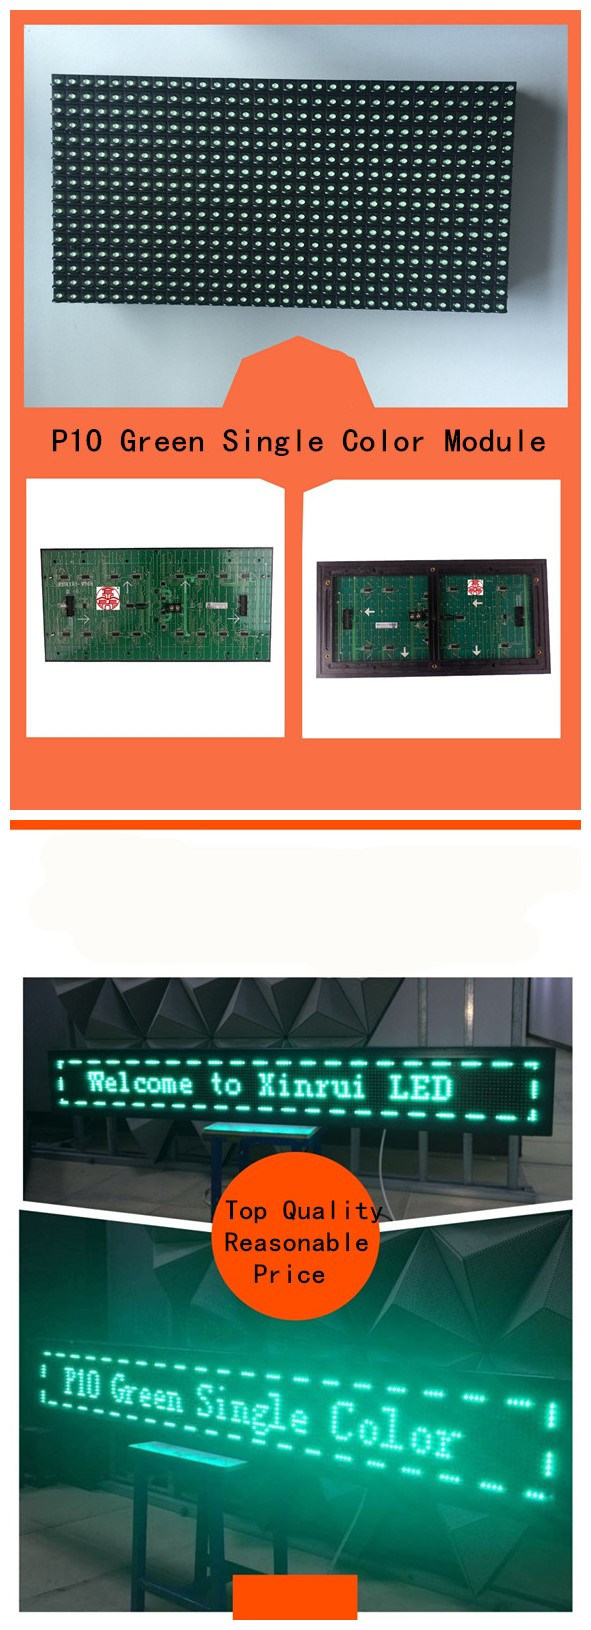 Outdoor P10 Single Color LED Scrolling Message Display P10 Single Red